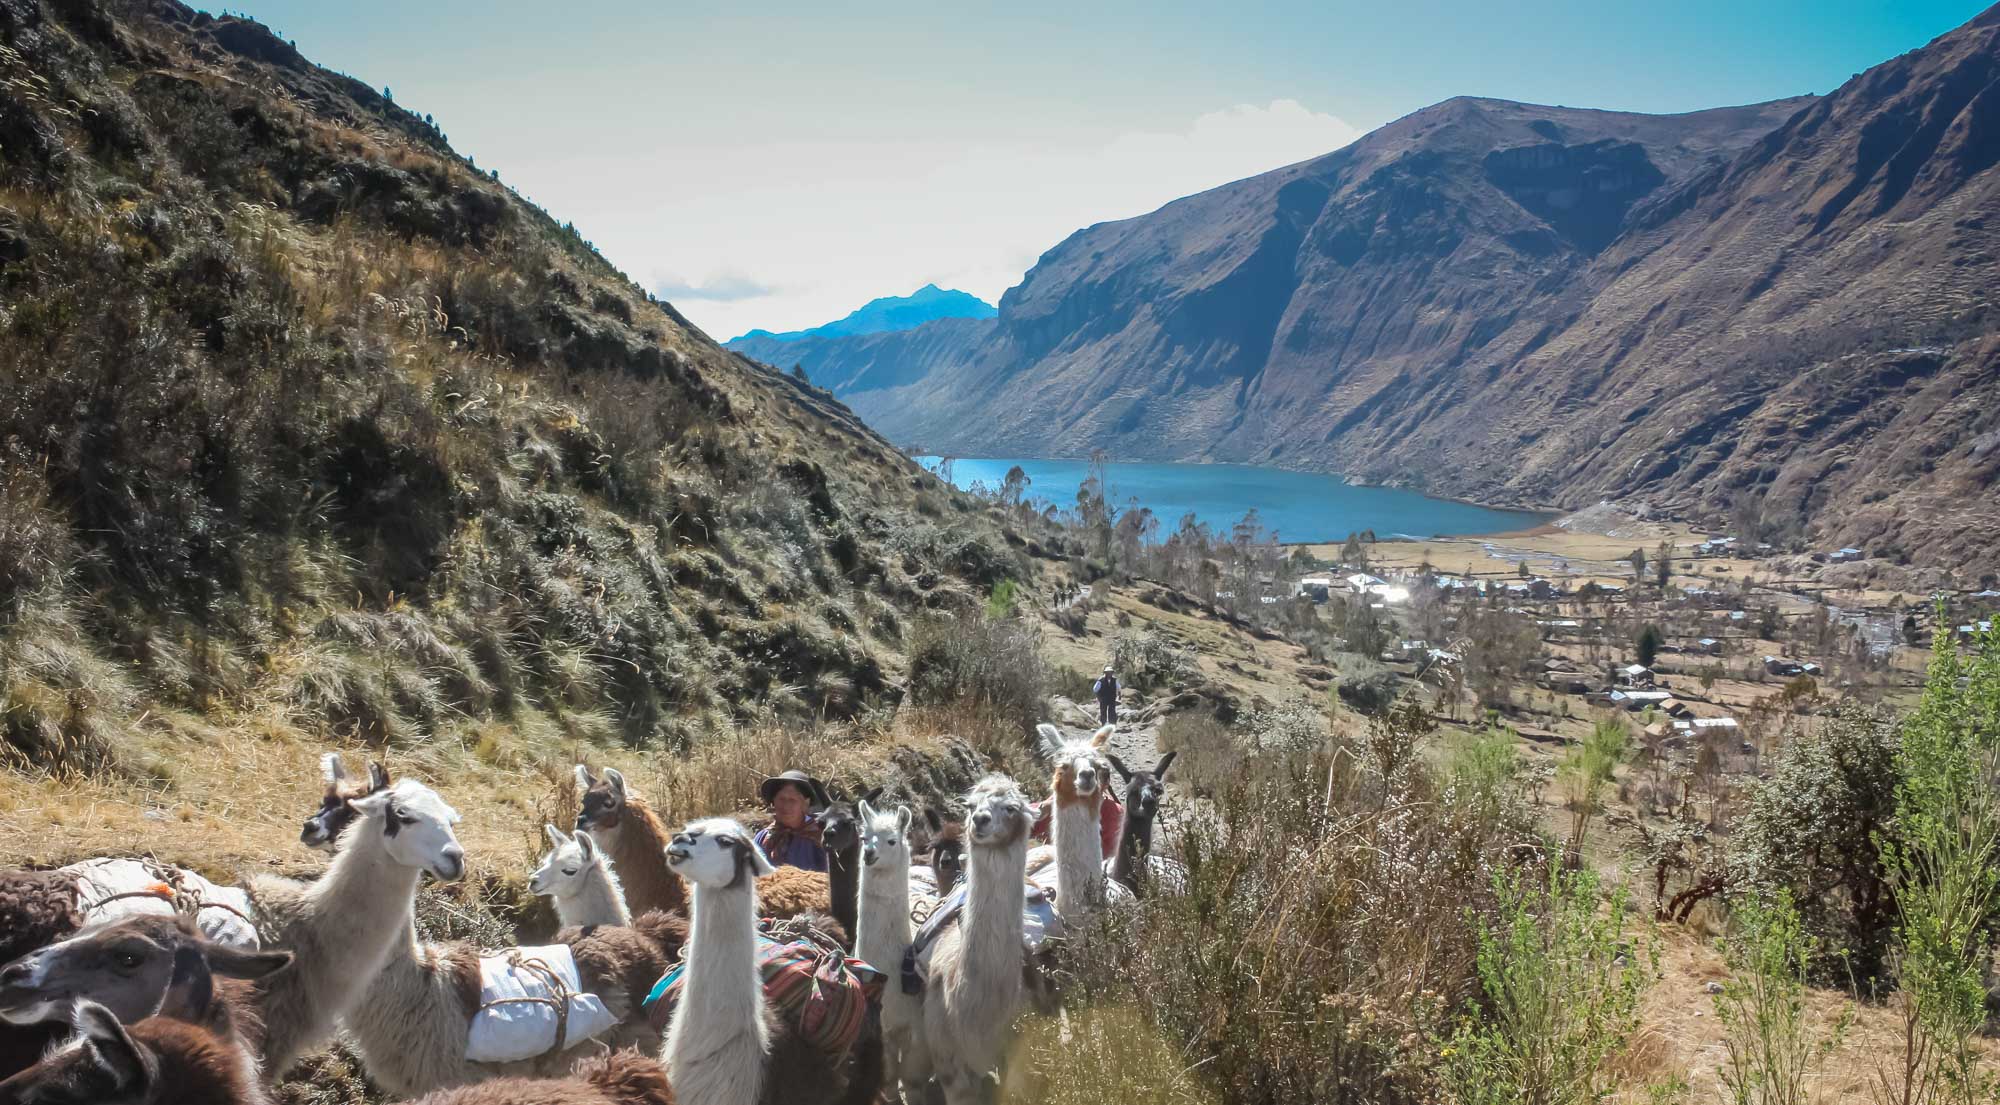 A couple and their llama flock walk uphill from a lake and village